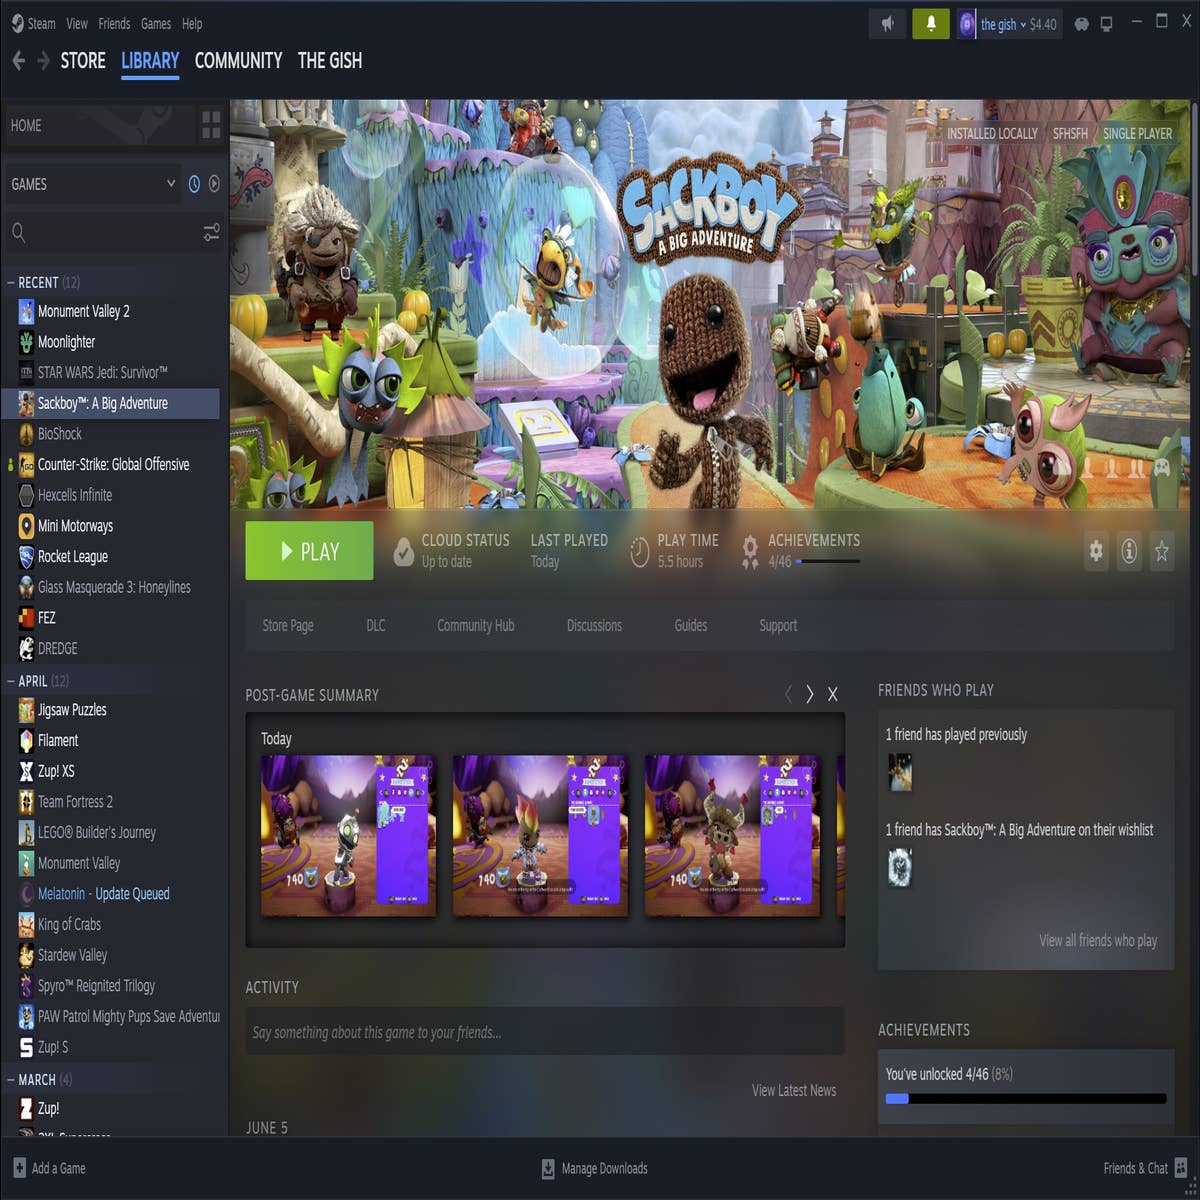 Steam Client Will Soon Let You Hide Games -- What Games Will You